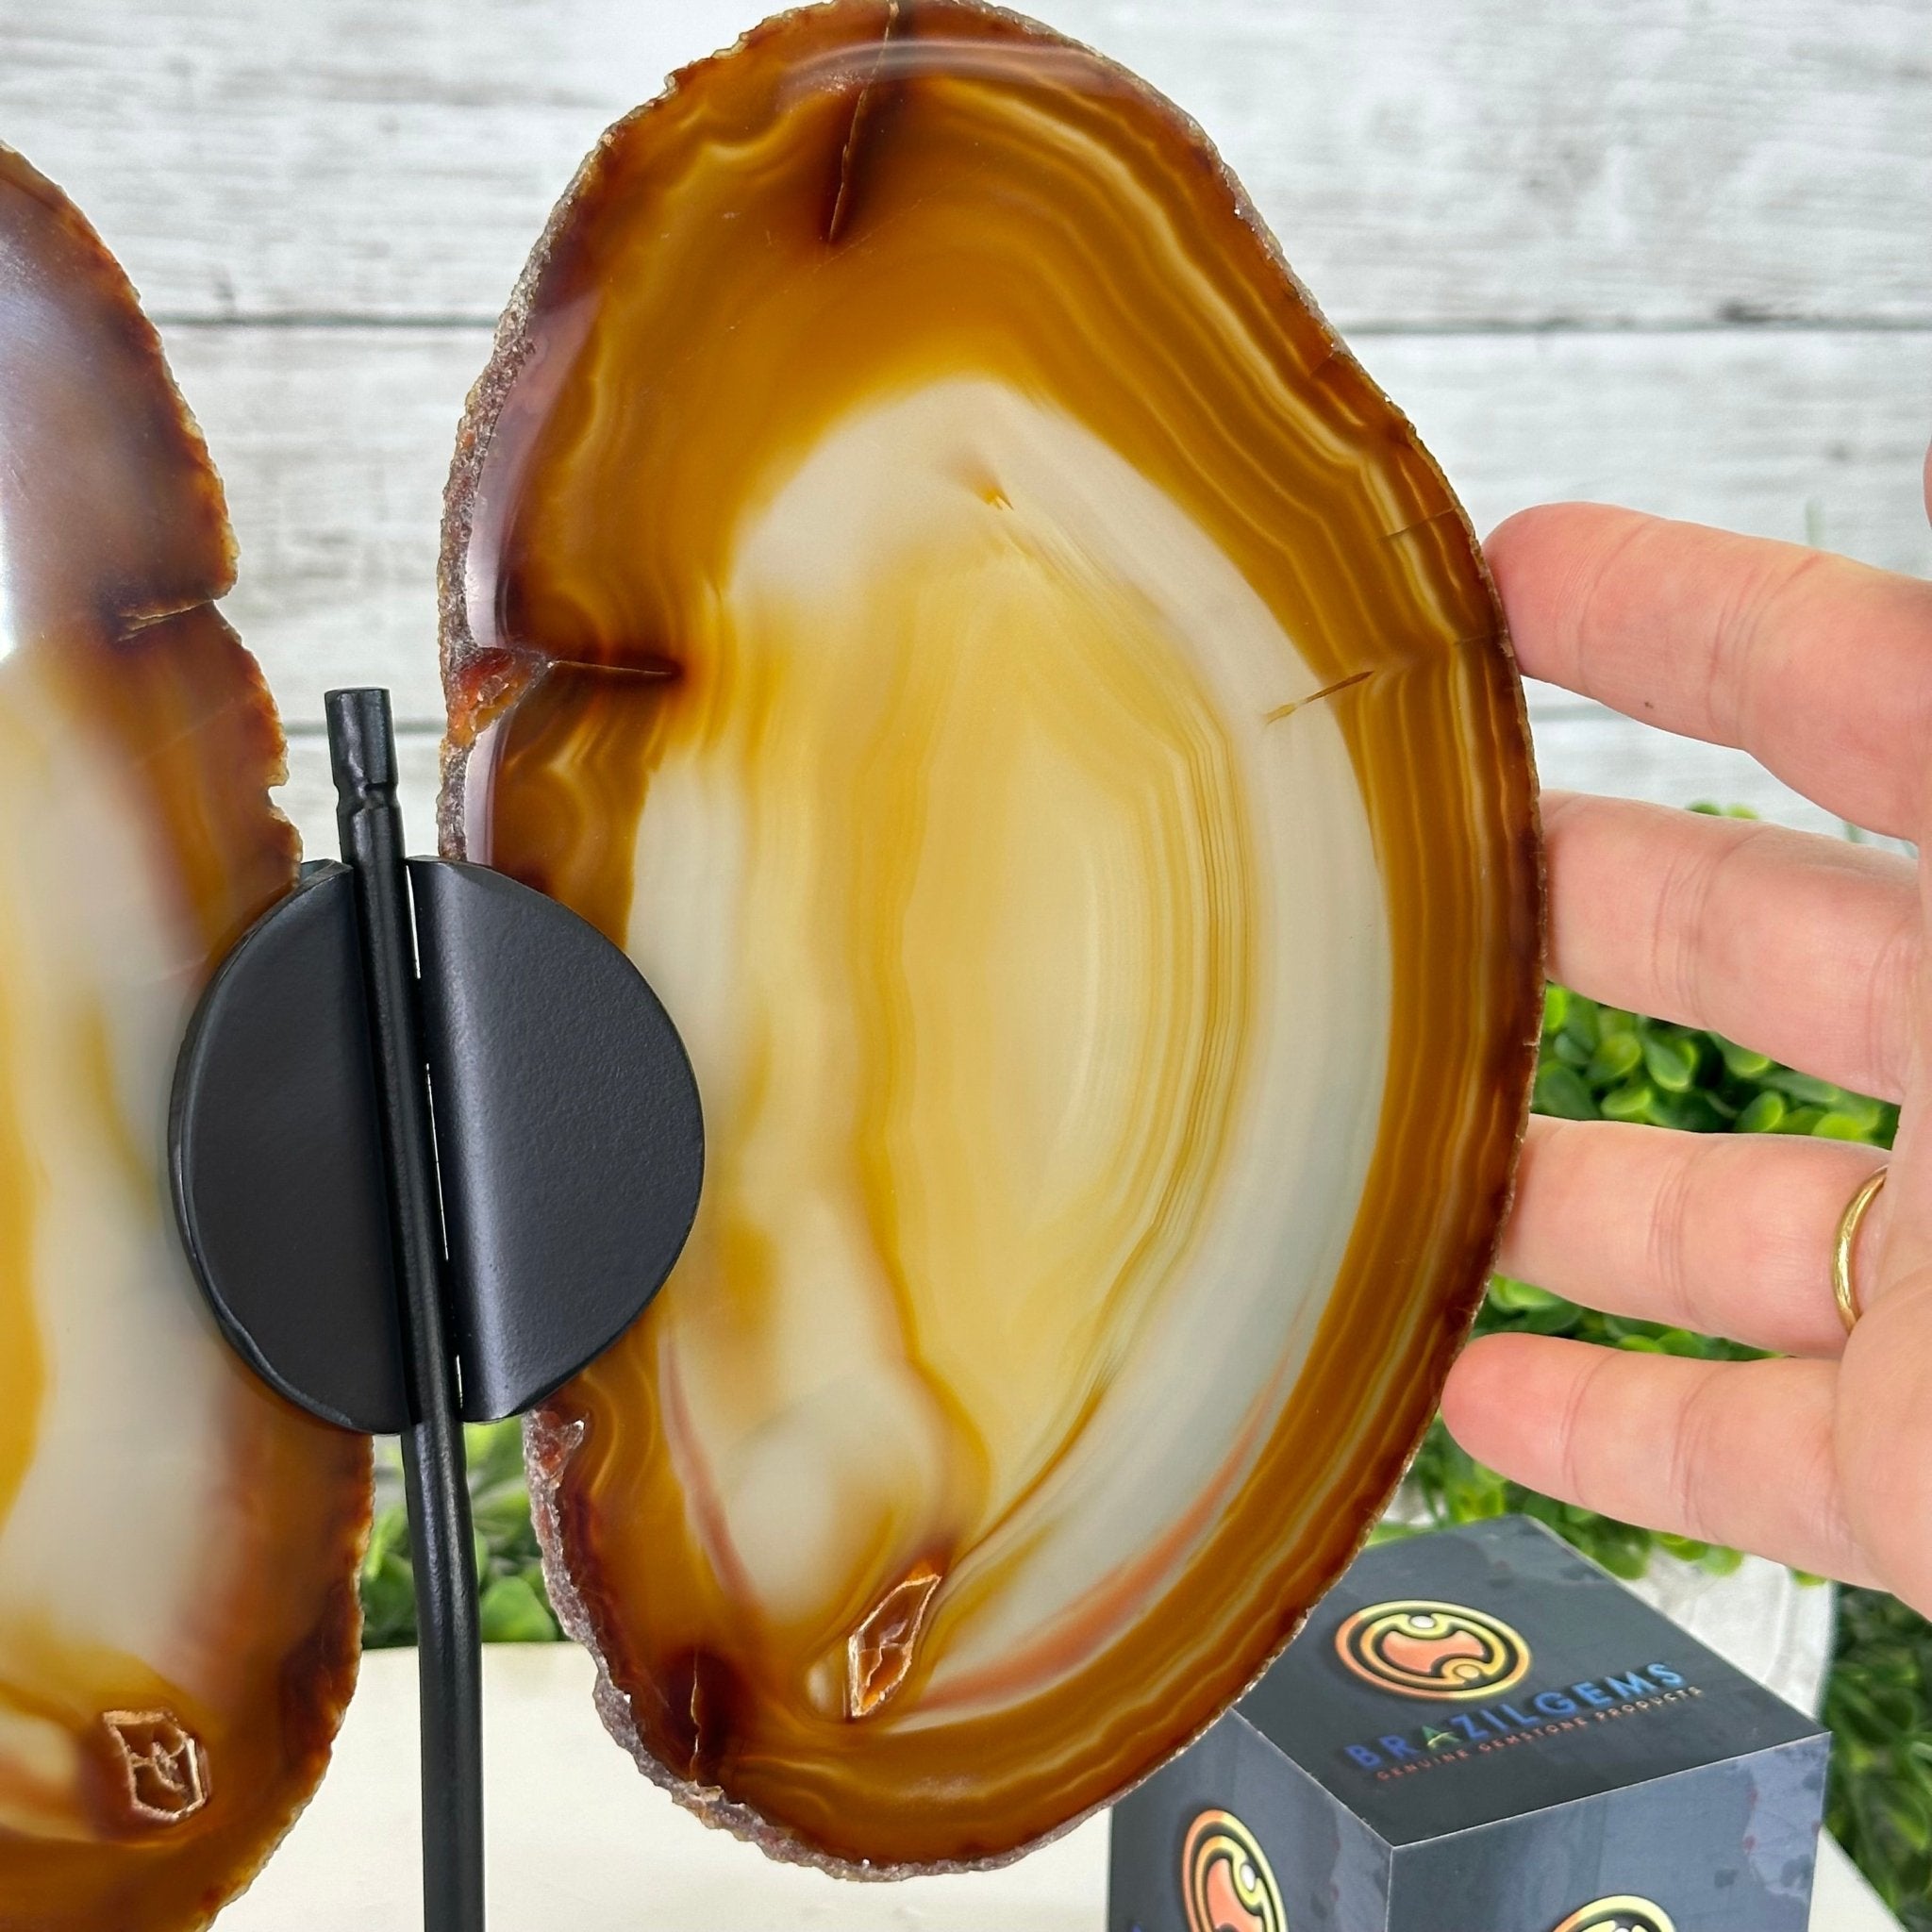 Natural Brazilian Agate "Butterfly Wings", 10.8" Tall #5050NA-120 - Brazil GemsBrazil GemsNatural Brazilian Agate "Butterfly Wings", 10.8" Tall #5050NA-120Agate Butterfly Wings5050NA-120